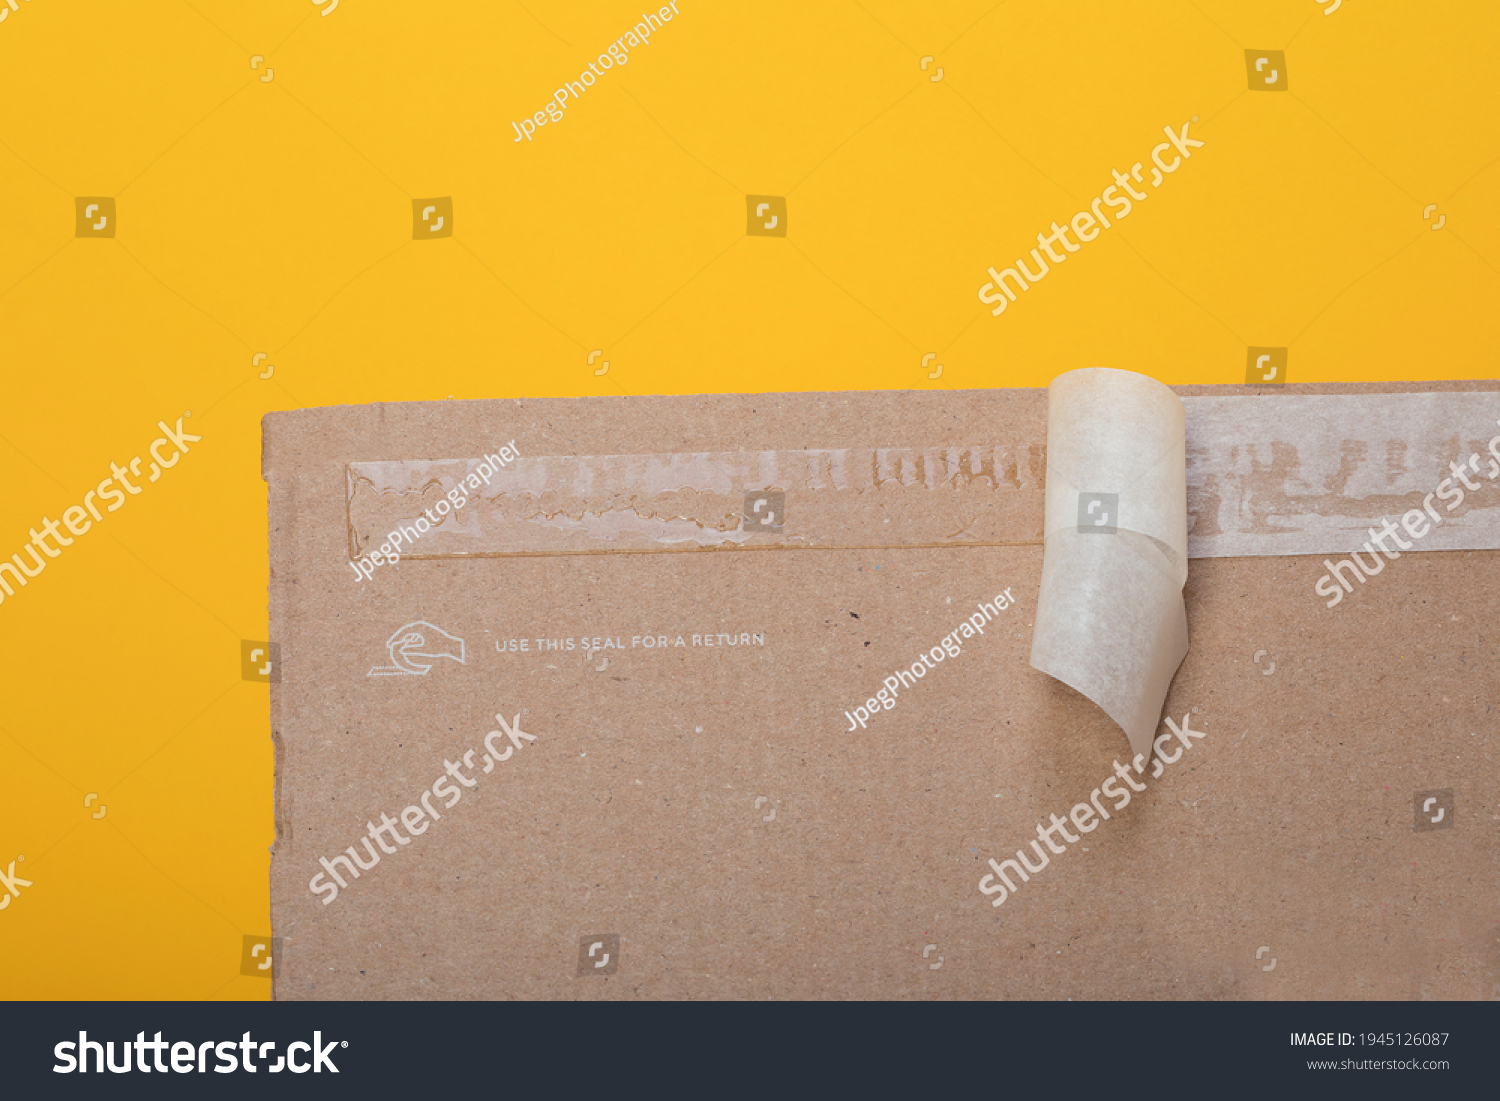 Resealable package for ecommerce products, fashion items returning. Sticky self adhesive sealing tape on corrugated cardboard box #1945126087